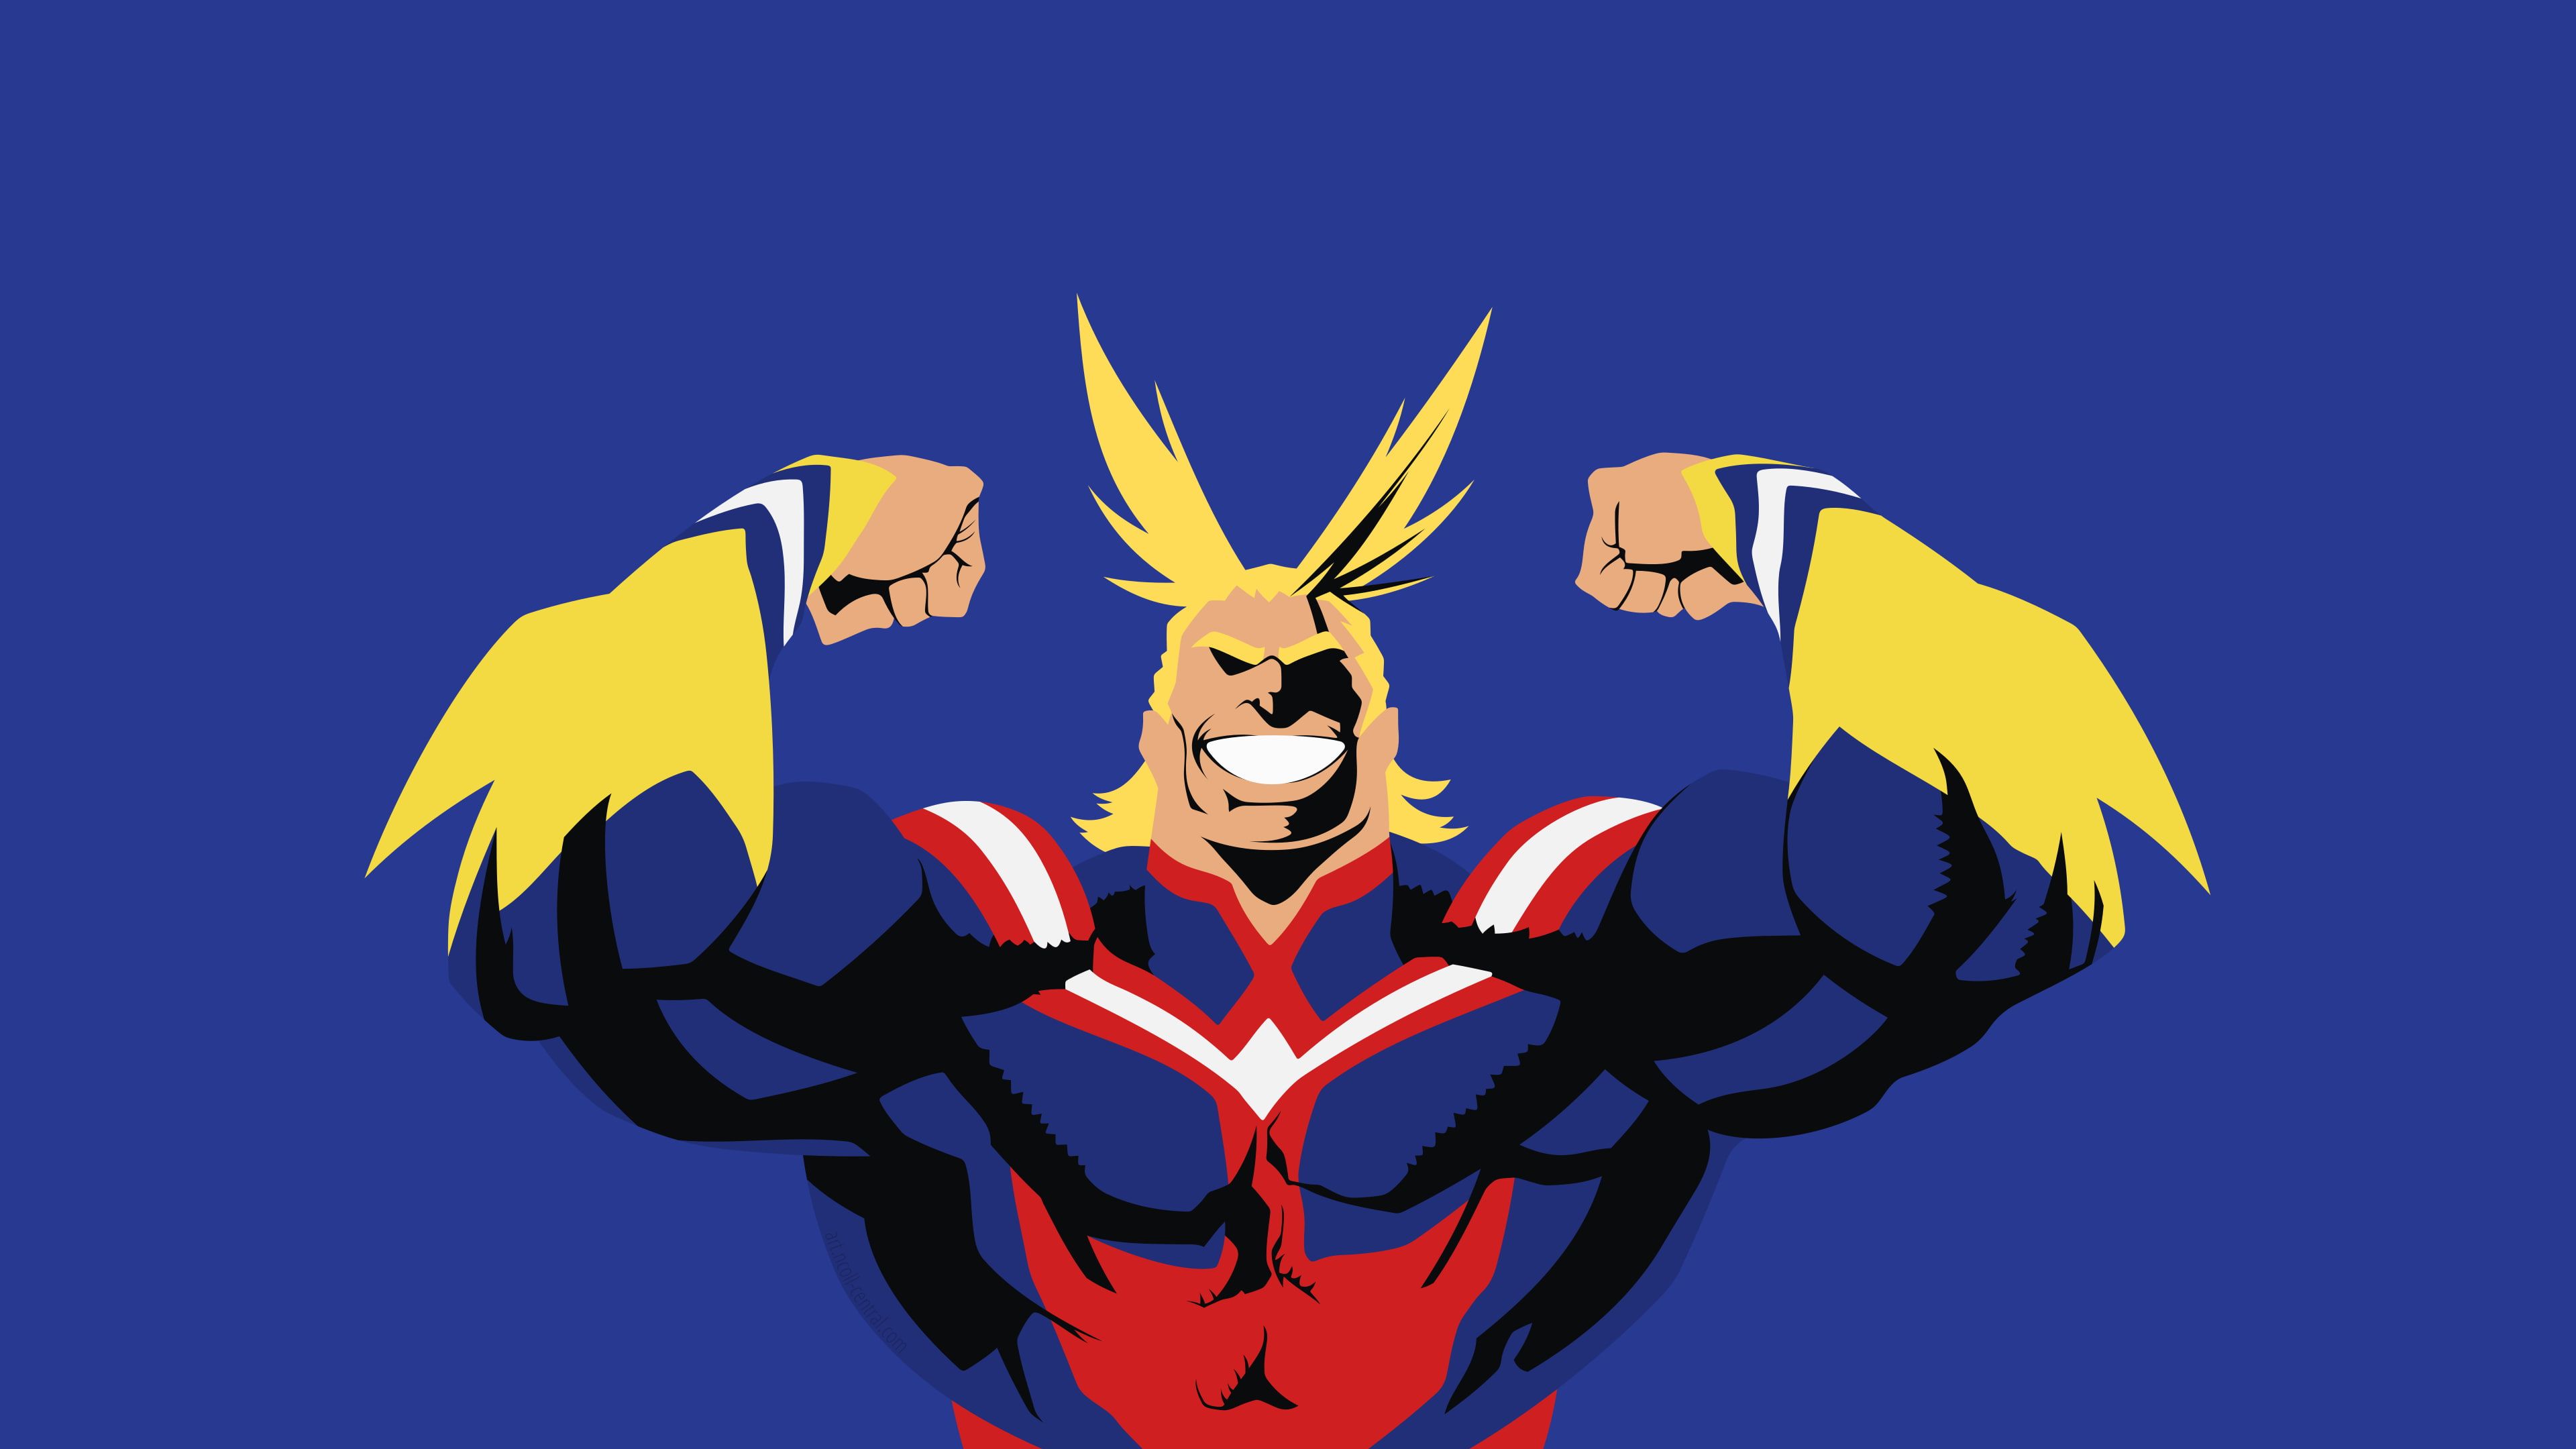 All Might Wallpapers on WallpaperDog